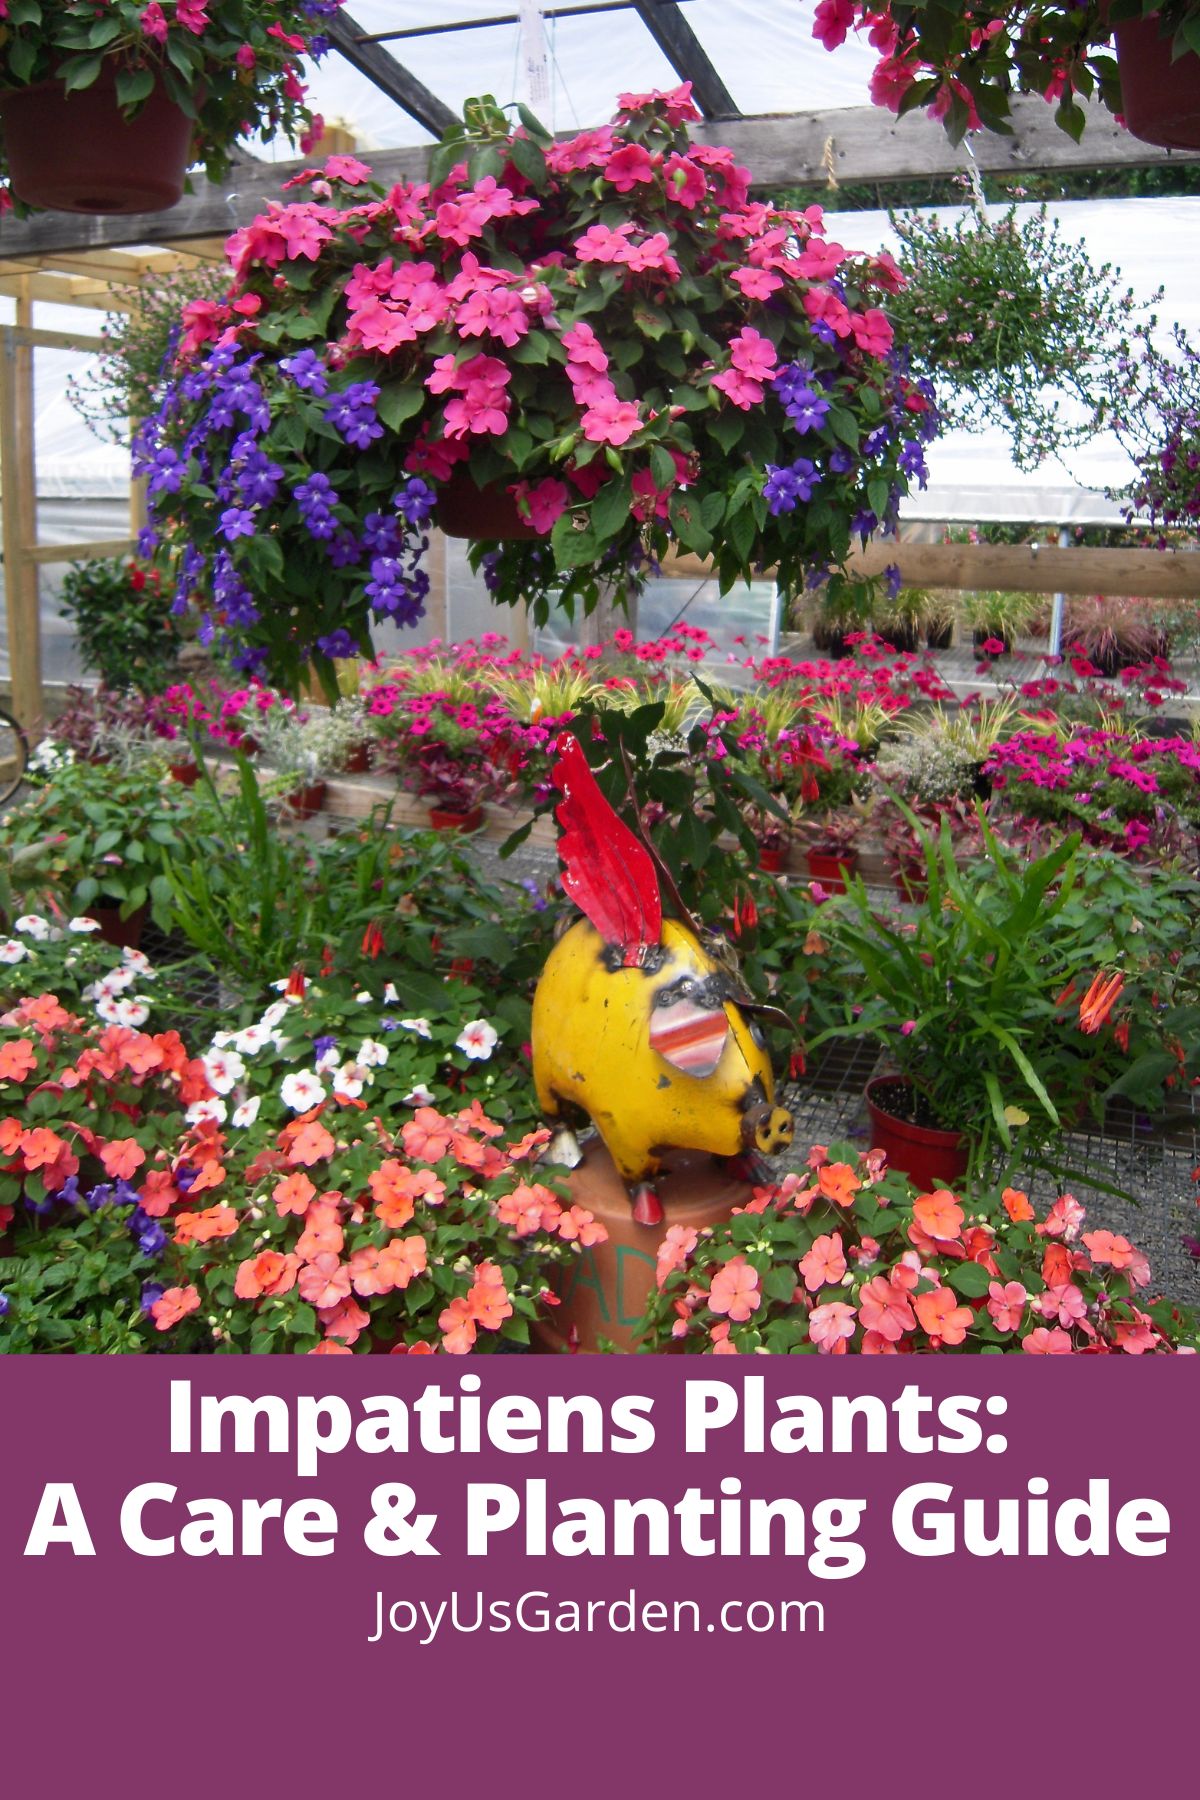 a colorful display of many colorful flowering plants with a yellow metal pig garden art in a greenhouse the text reads impatiens plants a care & planting guide joyusgarden.com